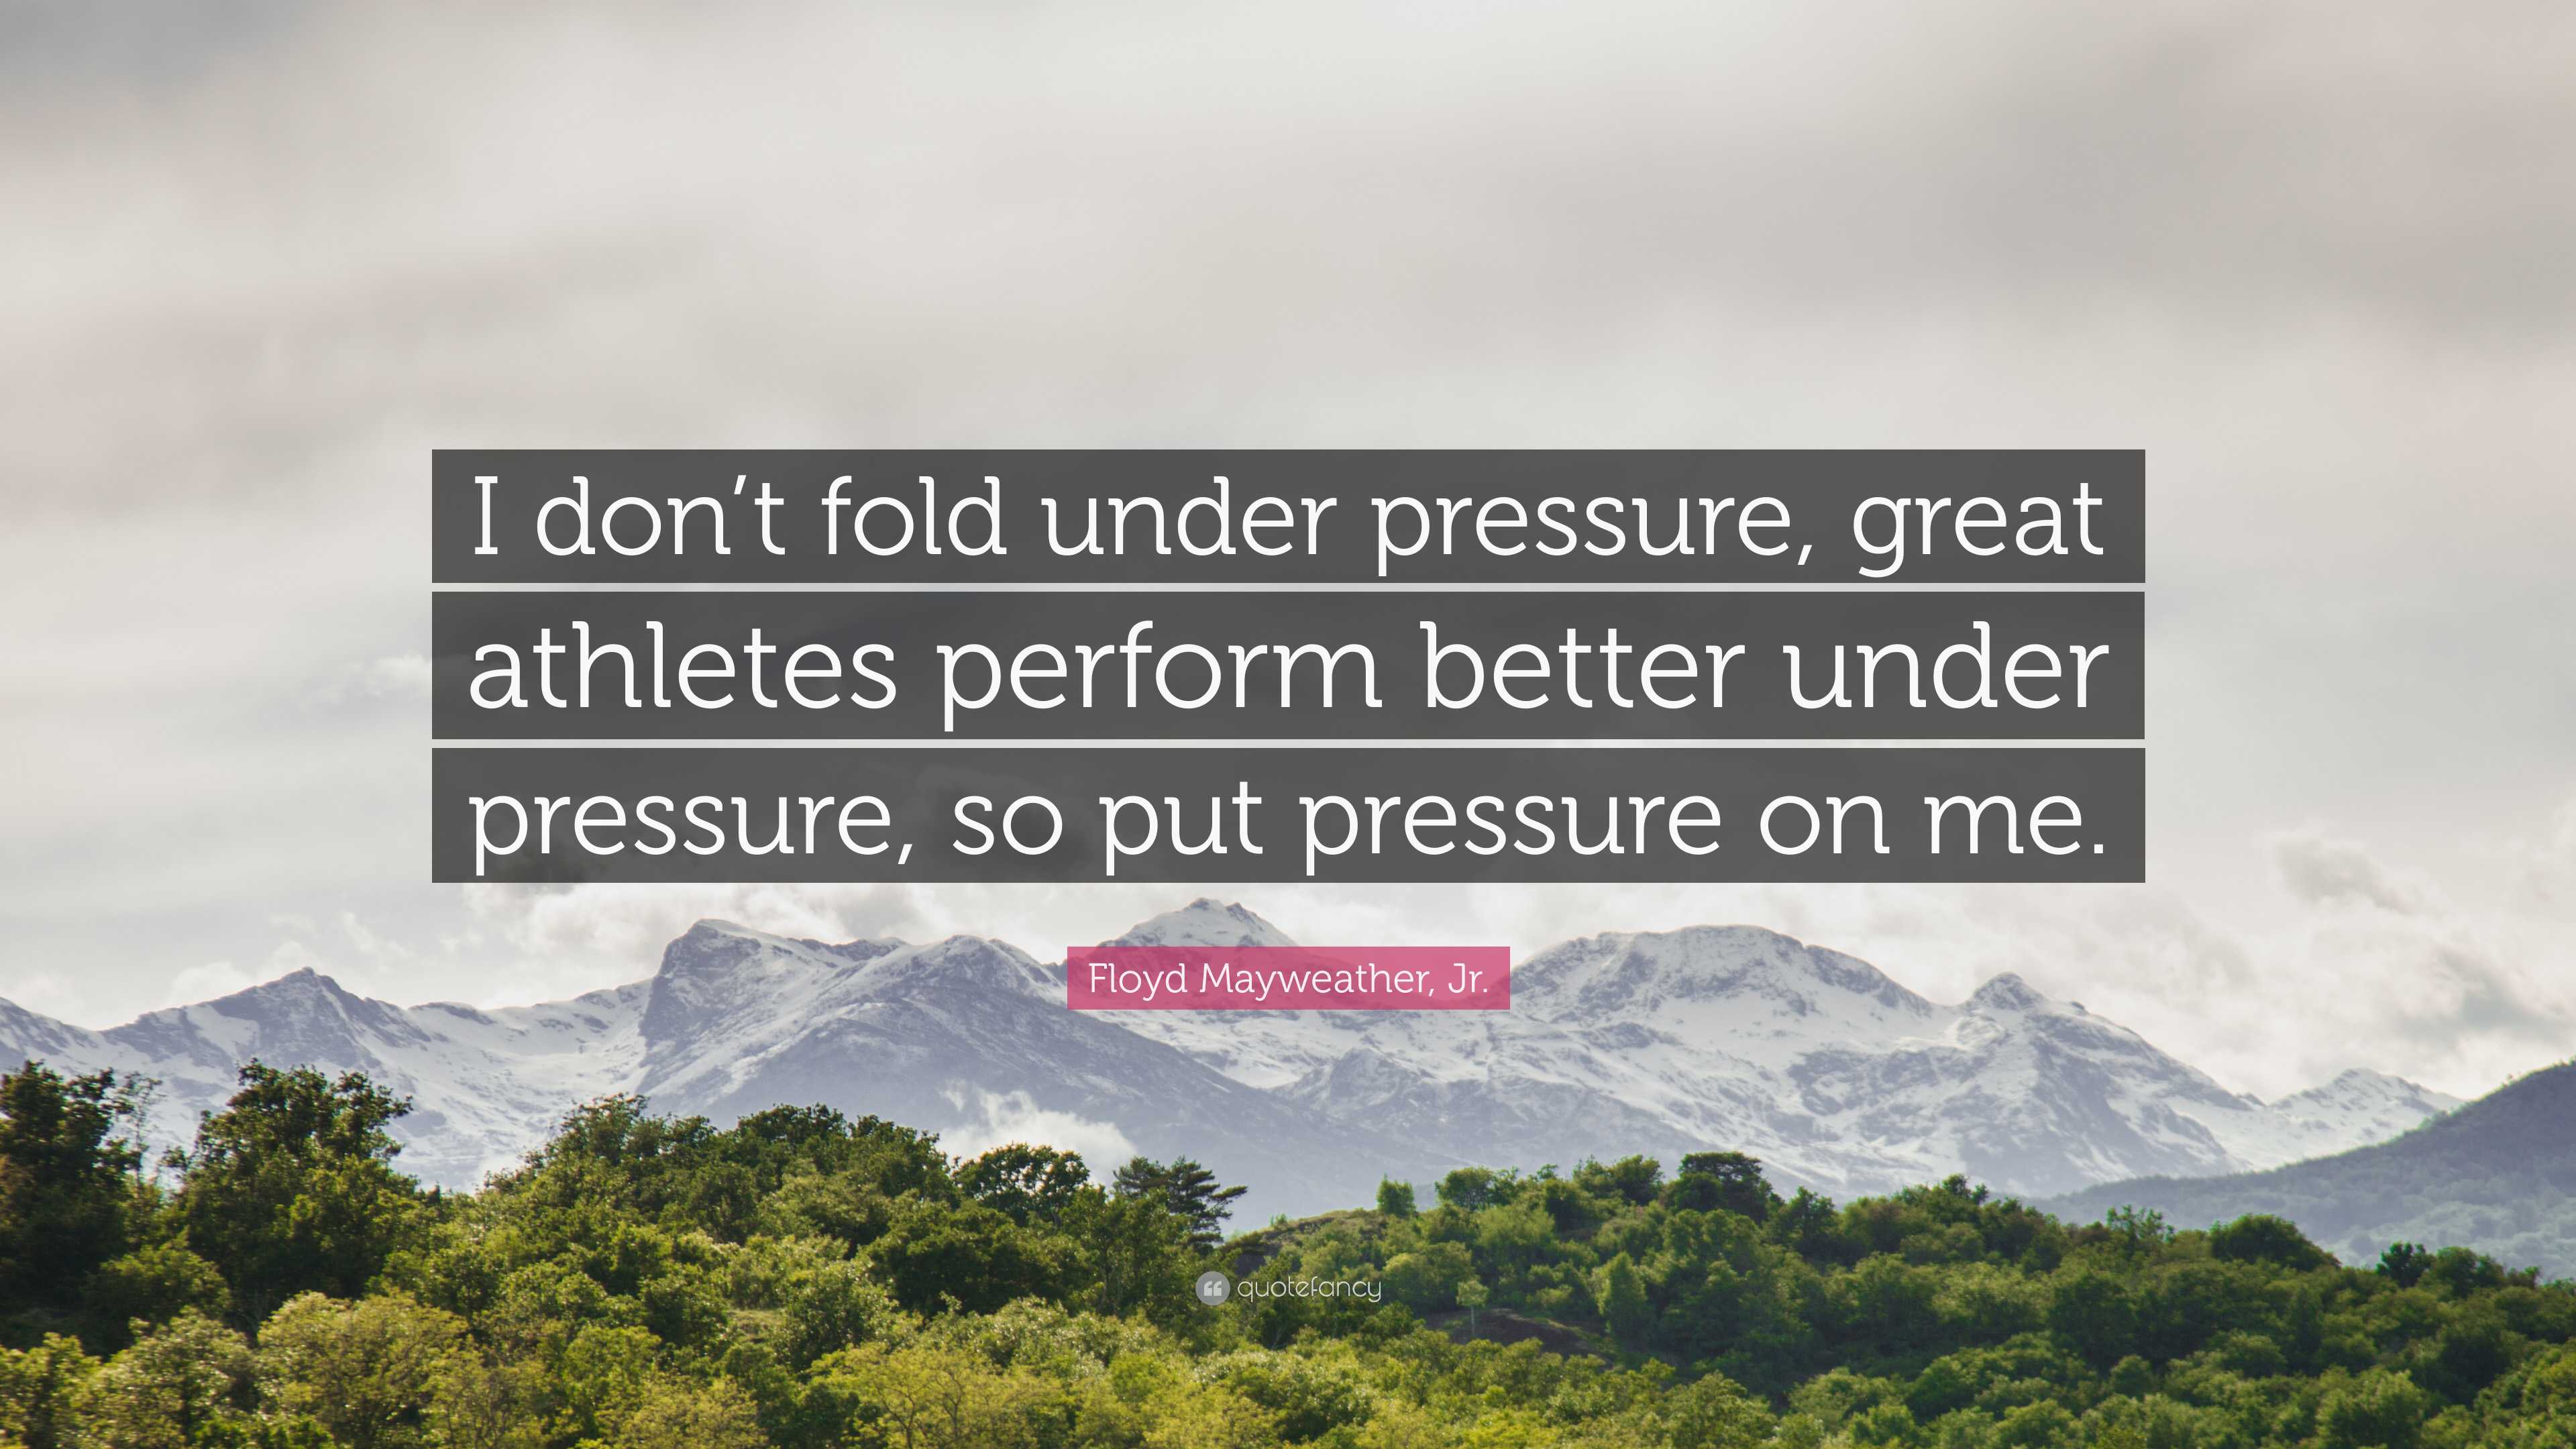 Why Do We Perform Better Under Pressure